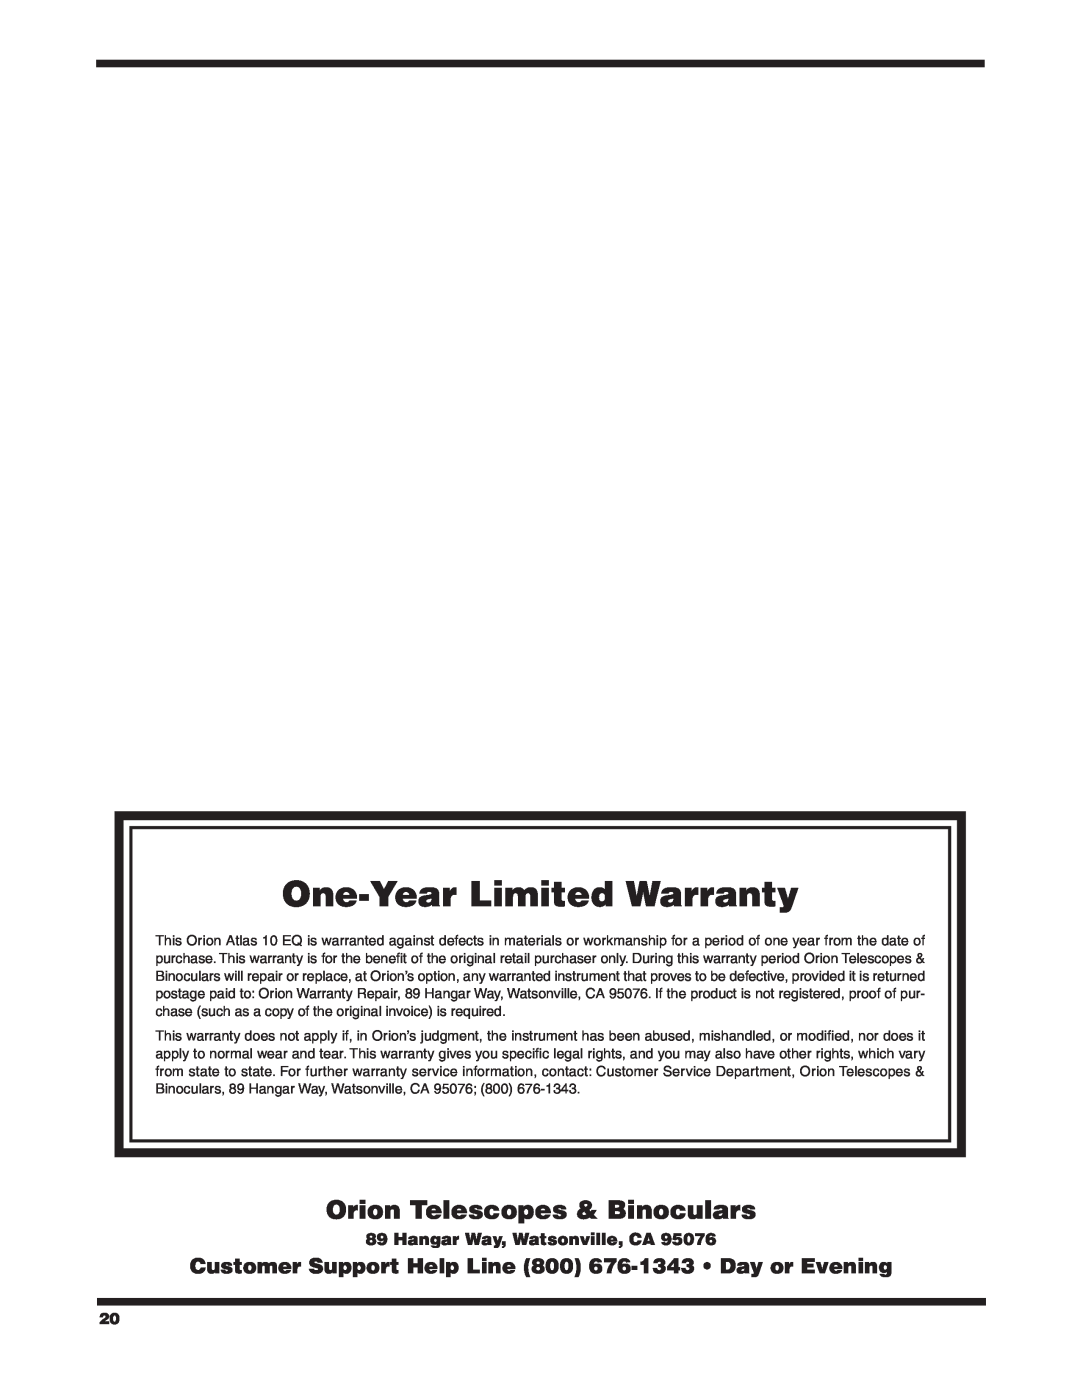 Orion 9874 Customer Support Help Line 800 676-1343 Day or Evening, One-Year Limited Warranty, Hangar Way, Watsonville, CA 